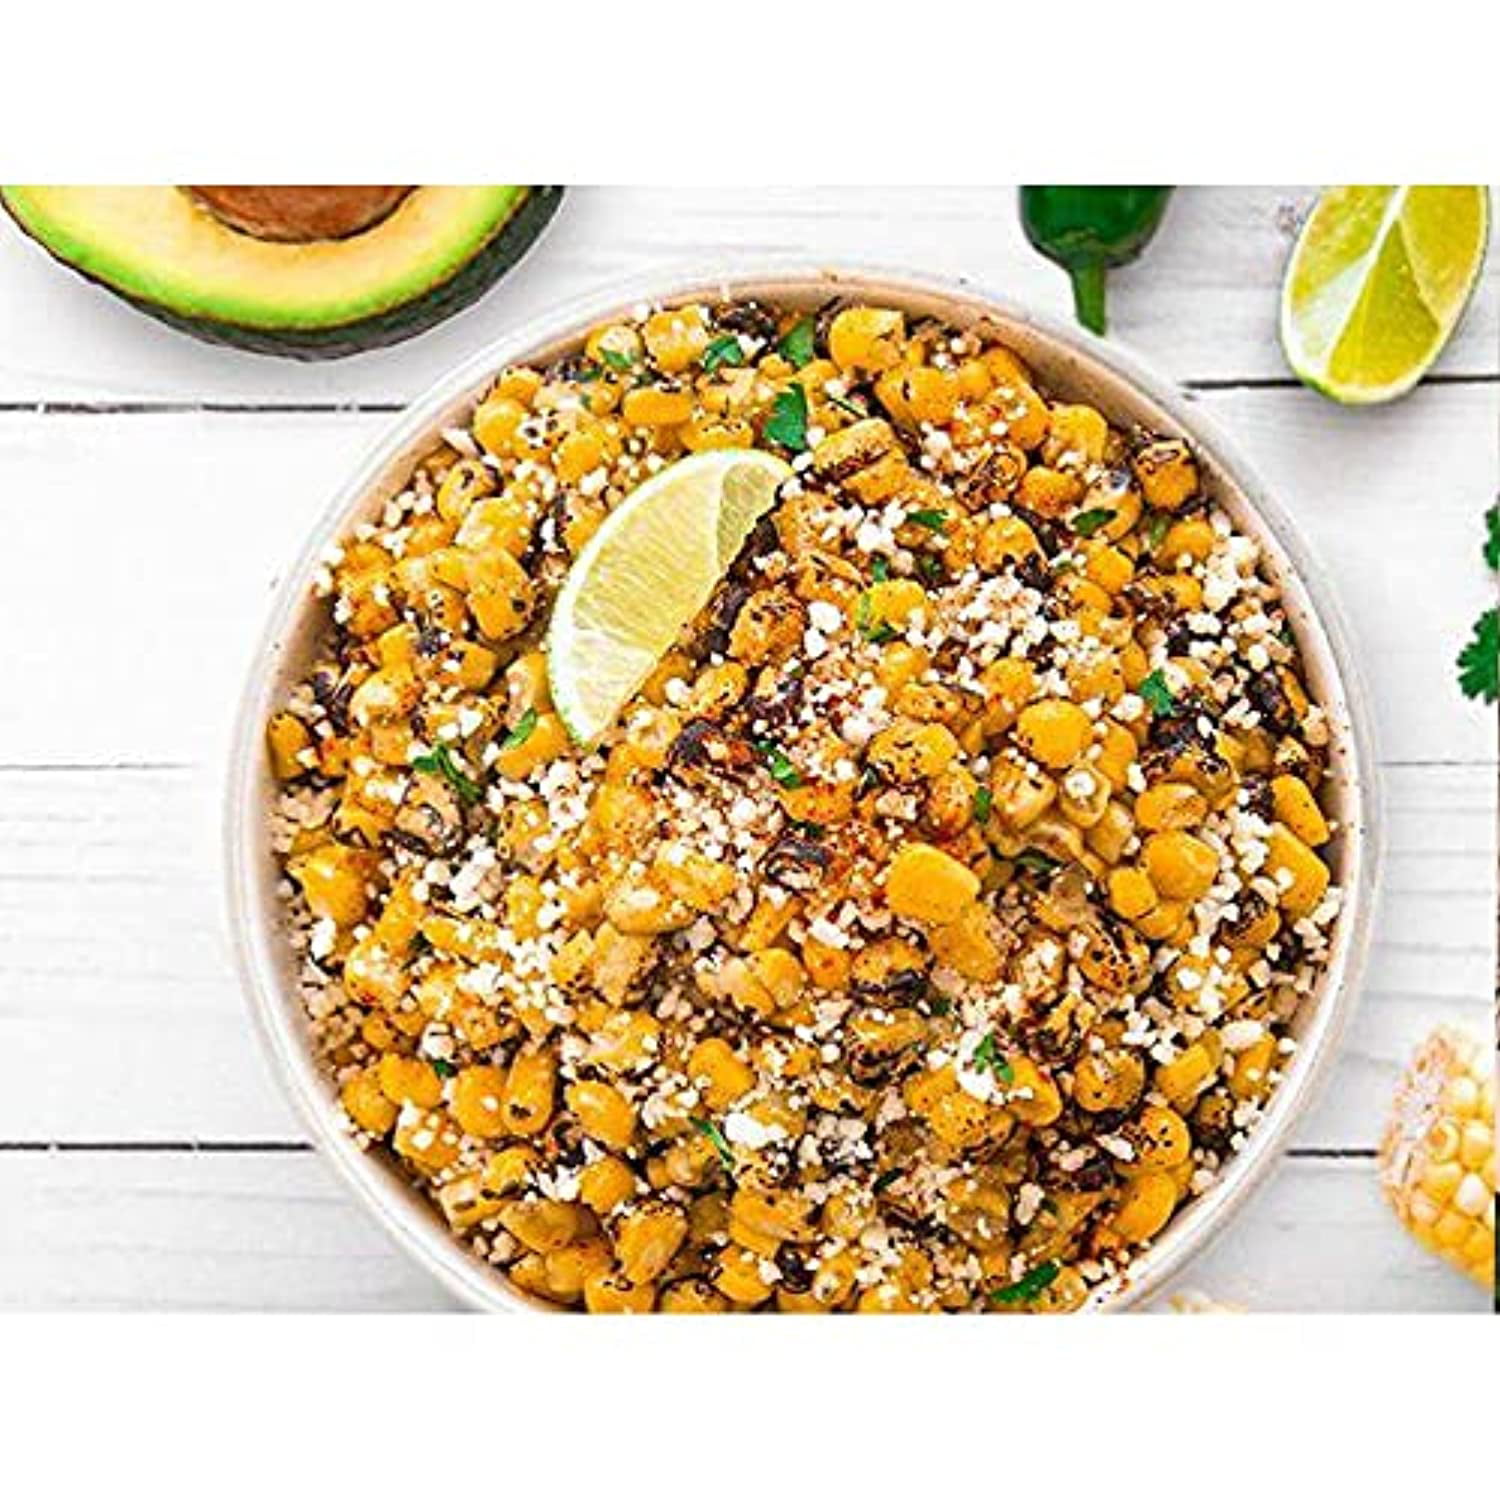 Tattooed Chef Frozen Mexican Style Street Corn With Cotija Cheese   GlutenFree And Vegetarian  Healthy Snack  High Protein  Frozen Corn  Side 12 Oz Each  By Gourmet Kitchn  Walmartcom